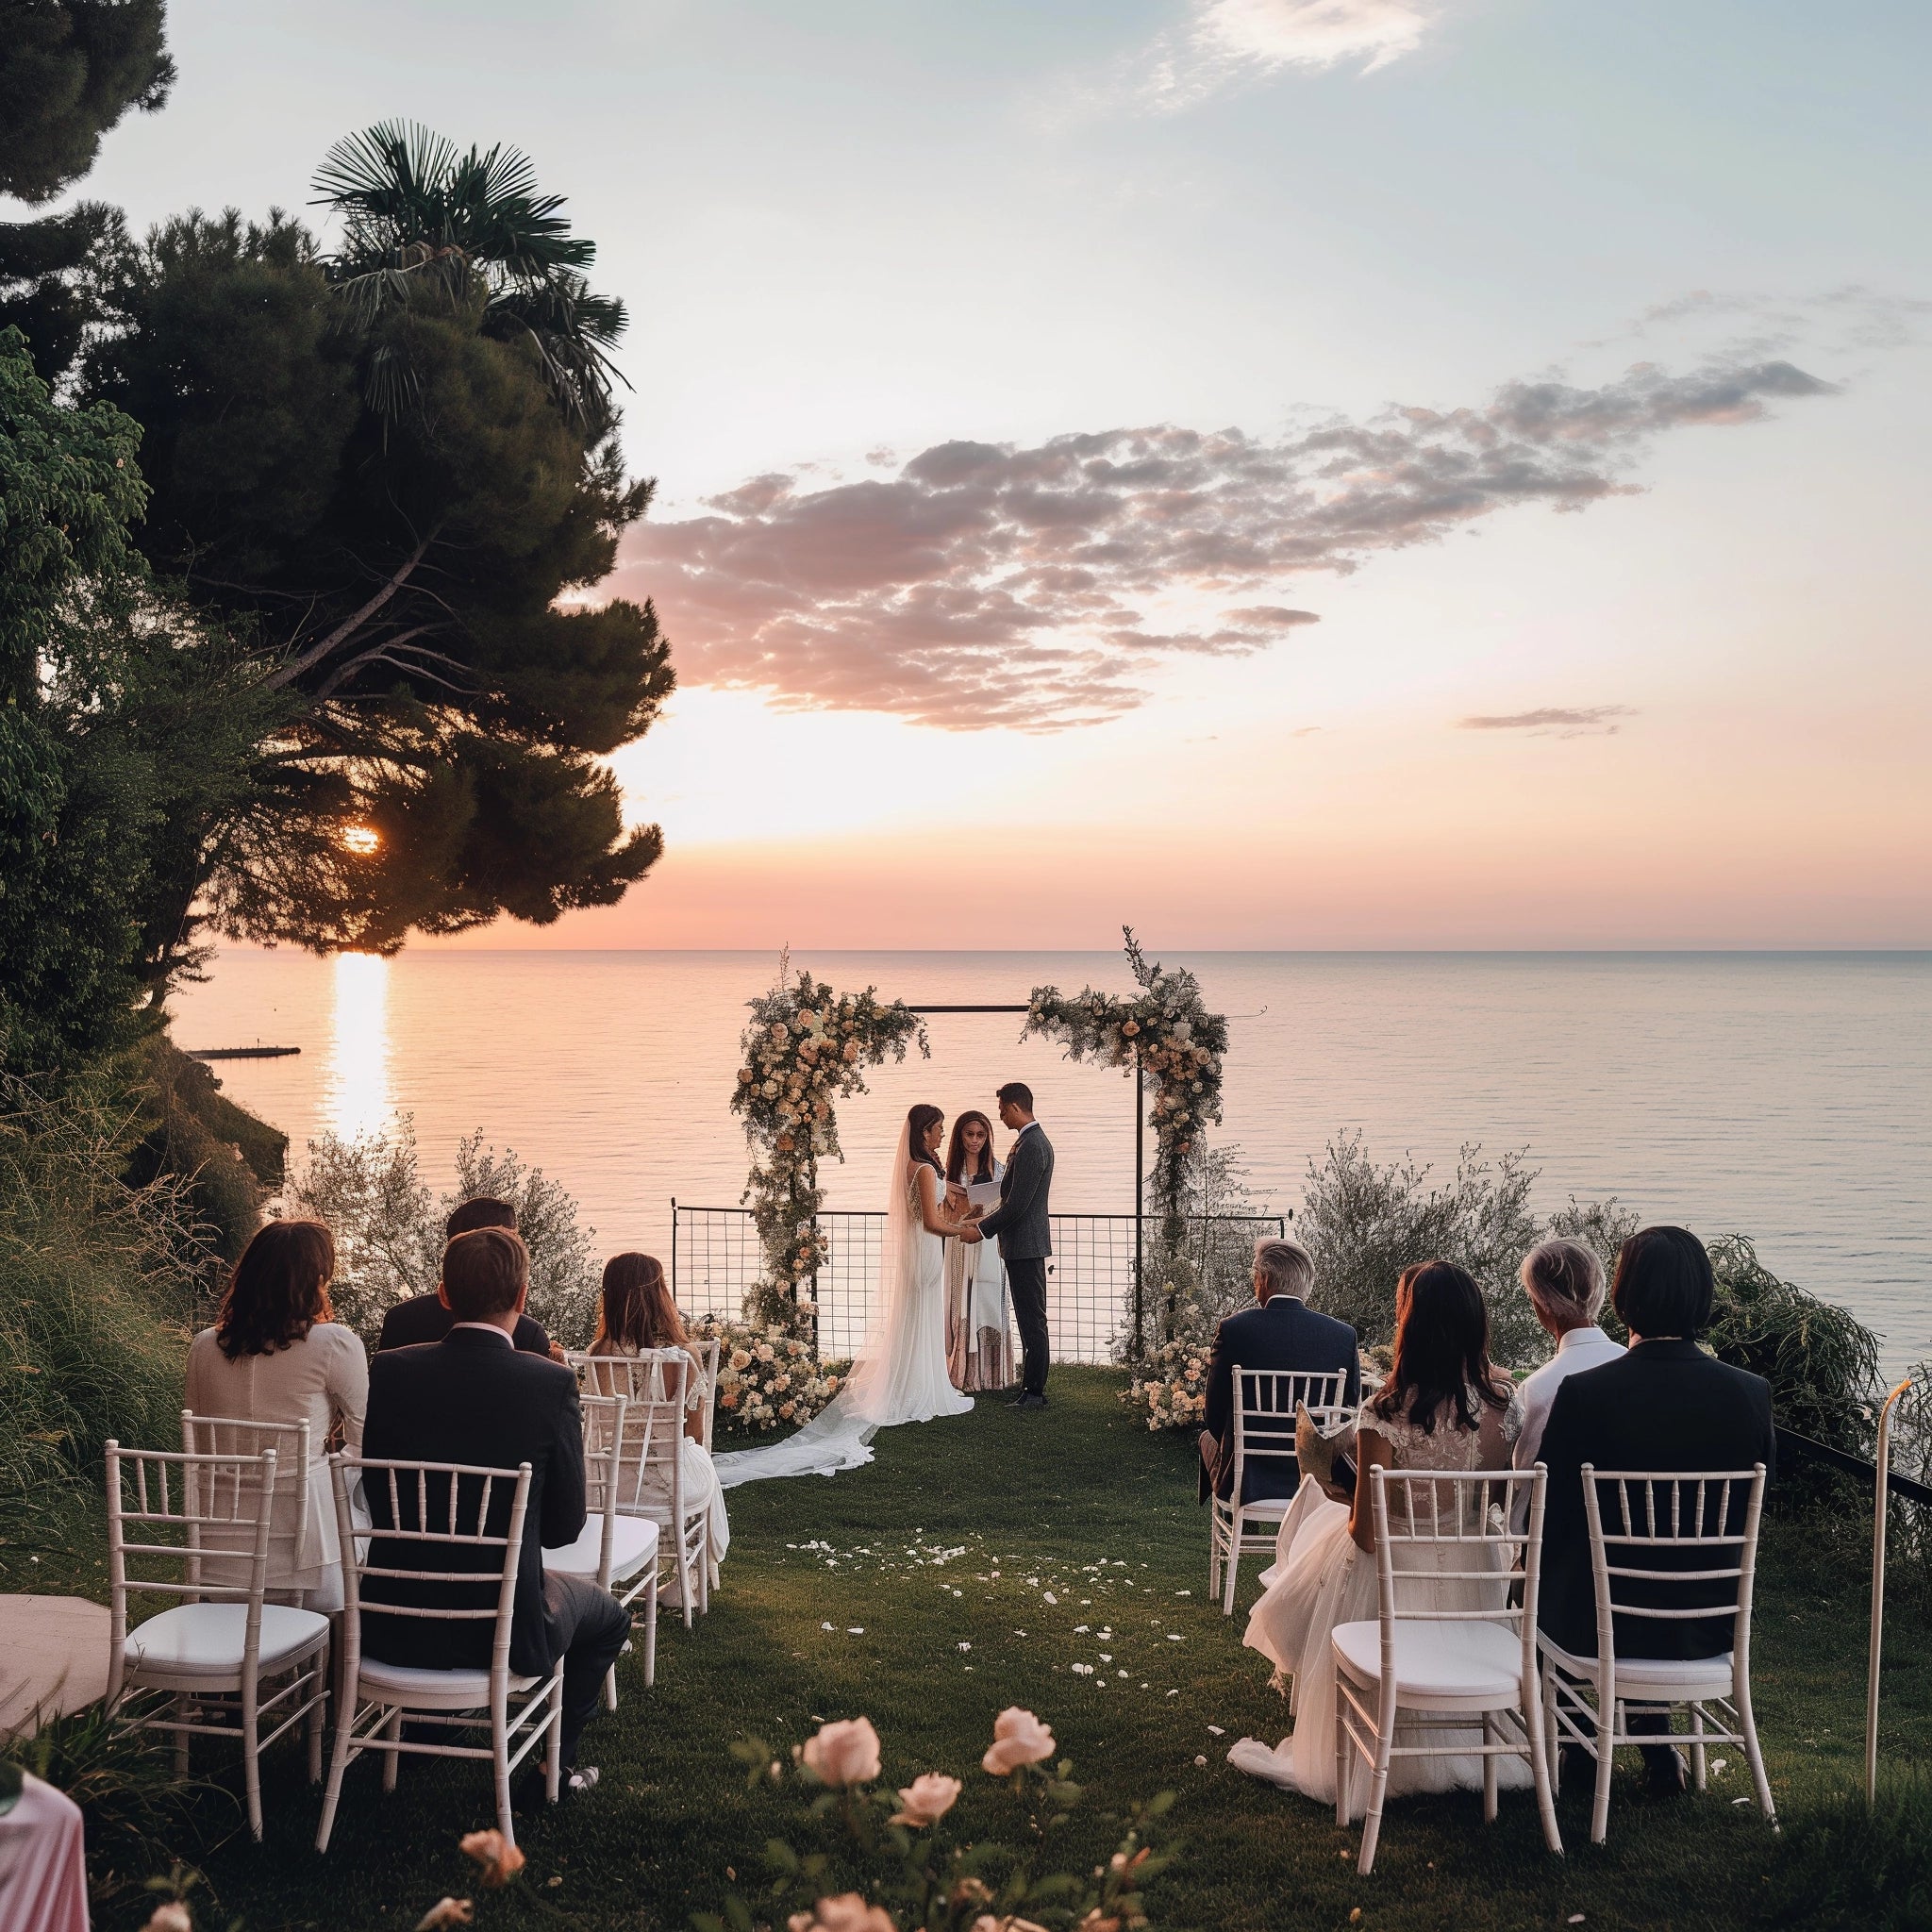 Top Wedding Destinations in the USA: Where Dreams Become Reality